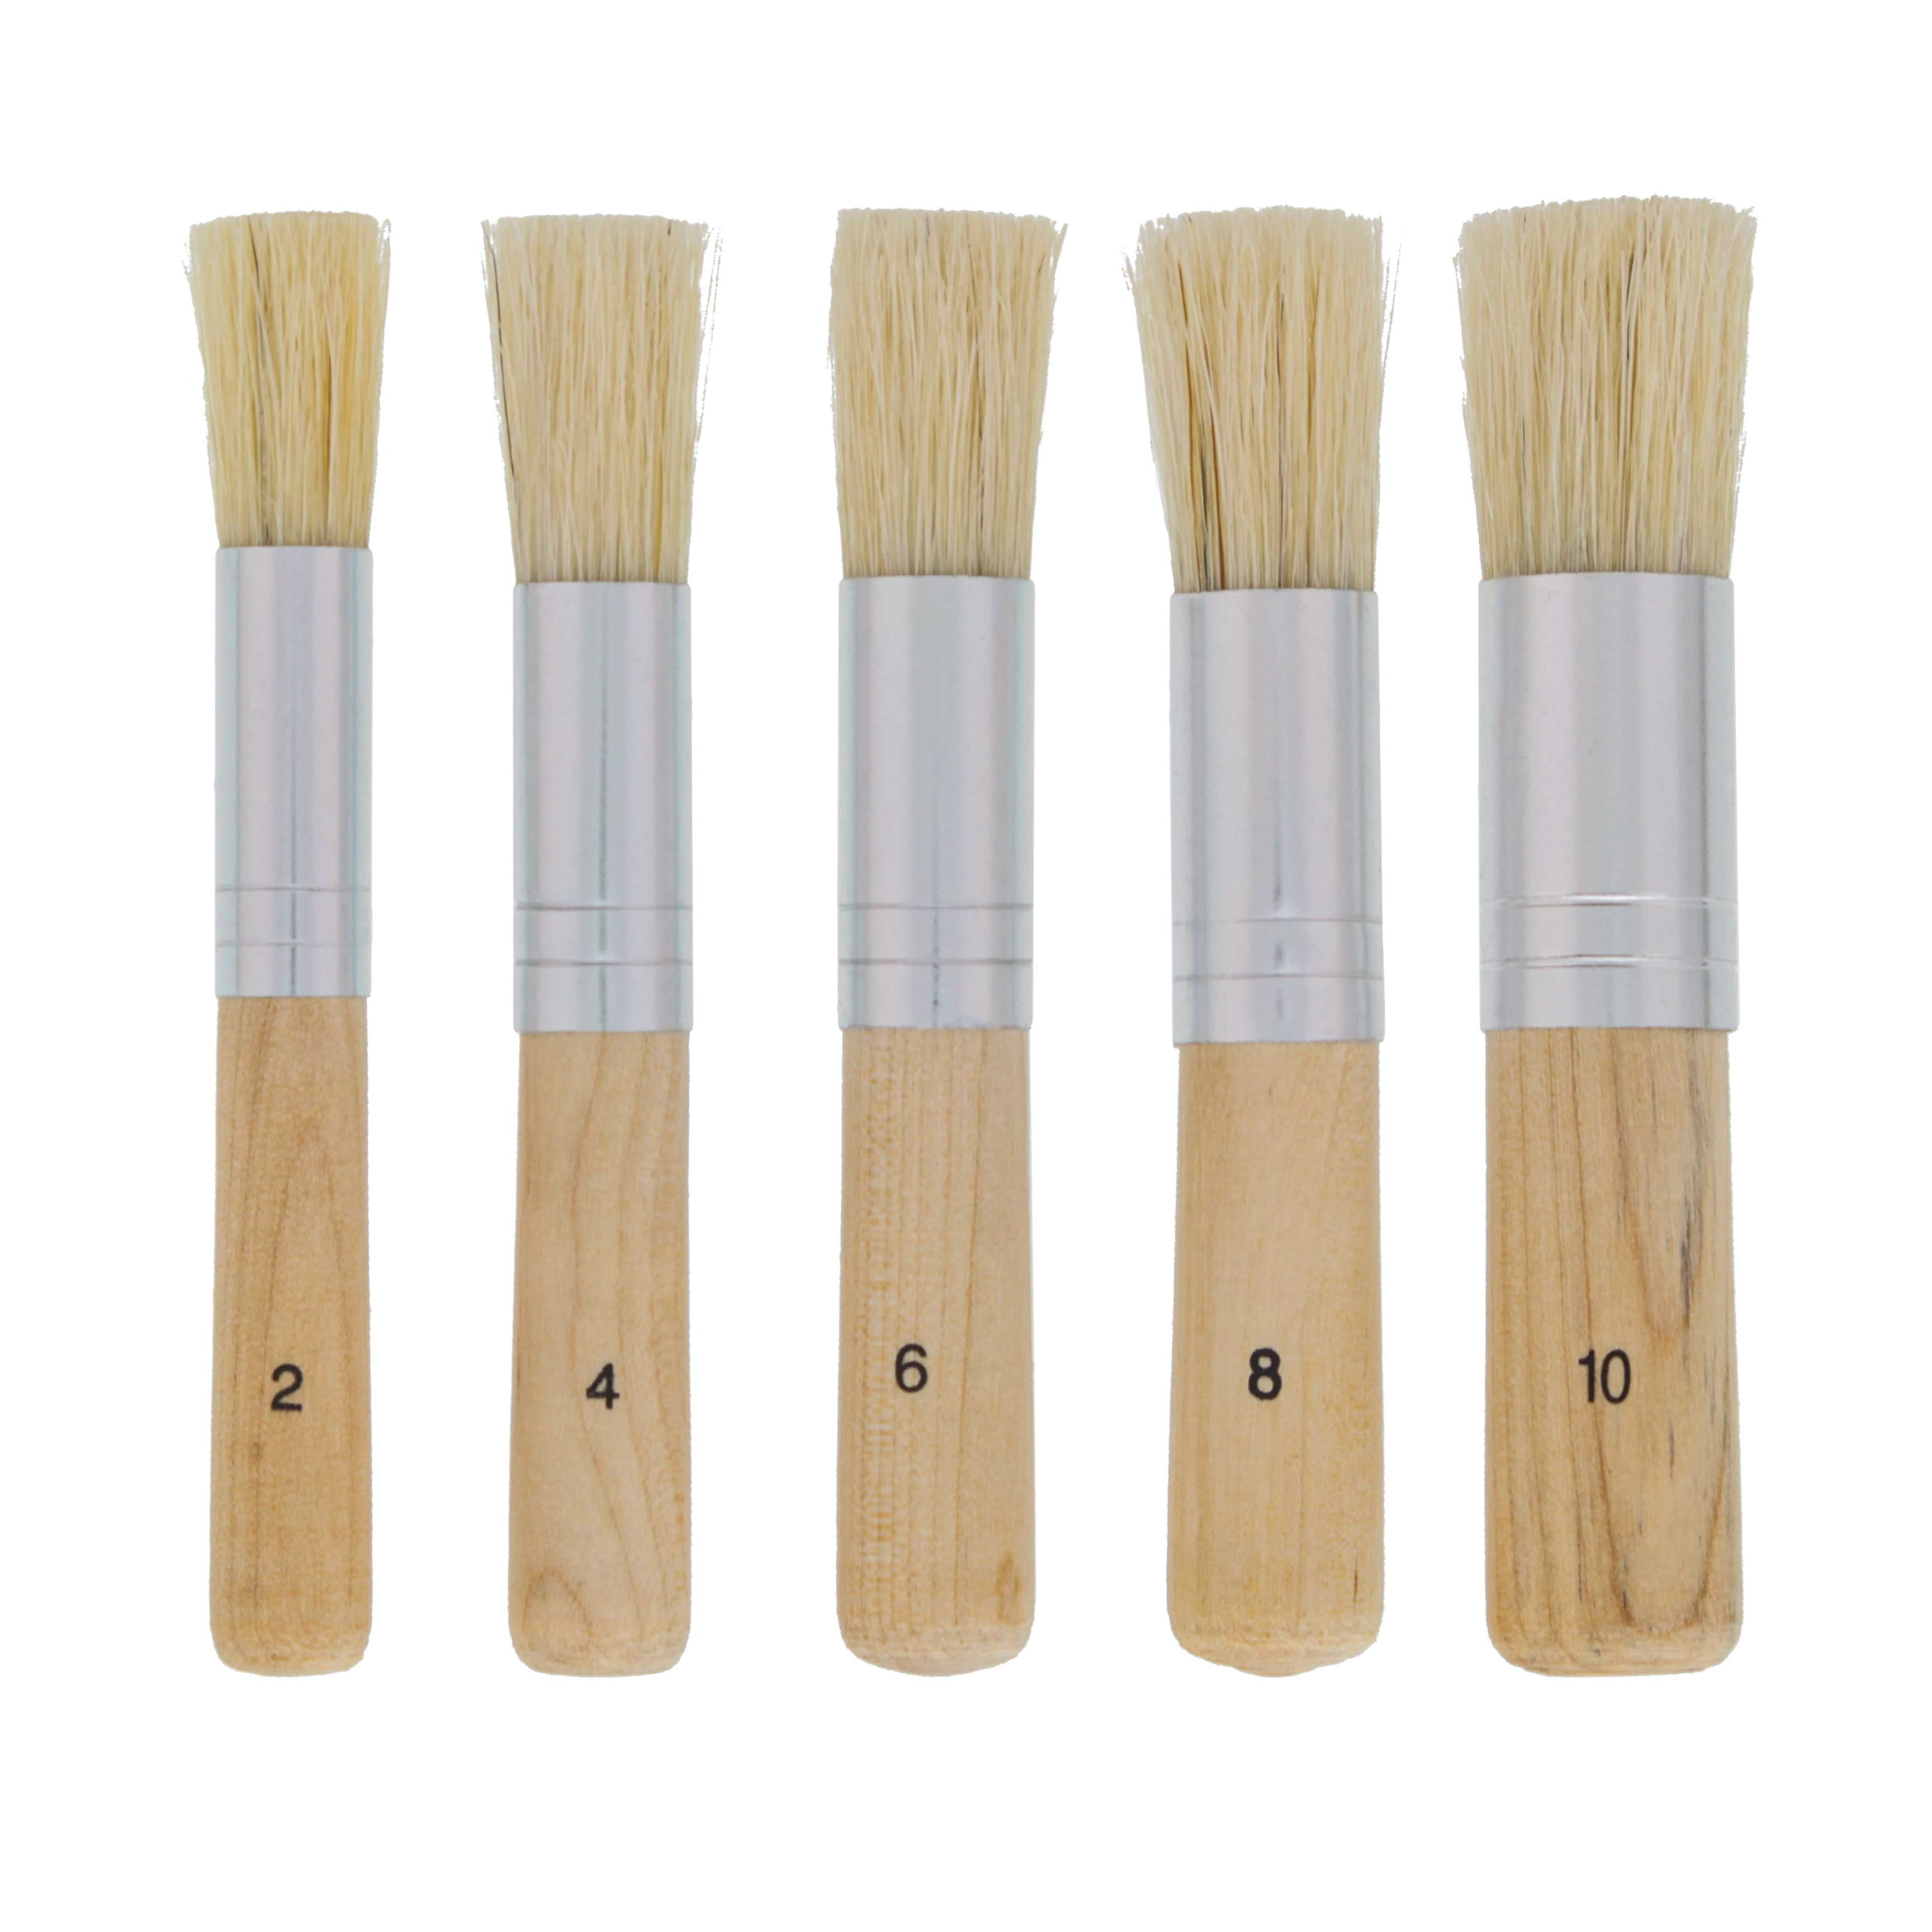 Watercolor Painting Oil Painting Natural Bristle Stencil Brushes for Acrylic Painting LUTER 6Pcs Wooden Stencil Brushes 3 Sizes DIY Art Crafts Project Card Making 